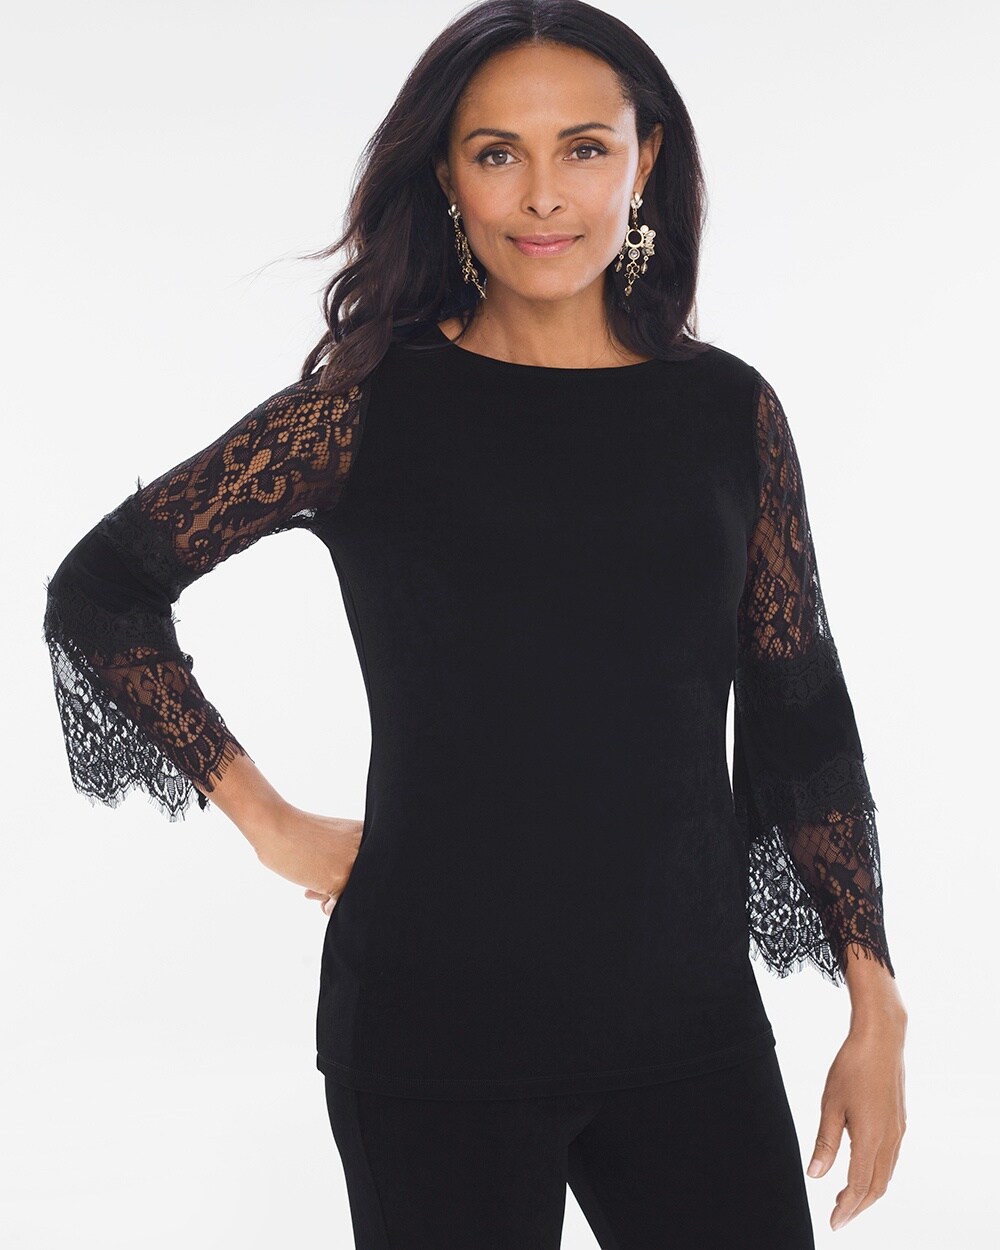 Travelers Classic Black Lace Detail Top